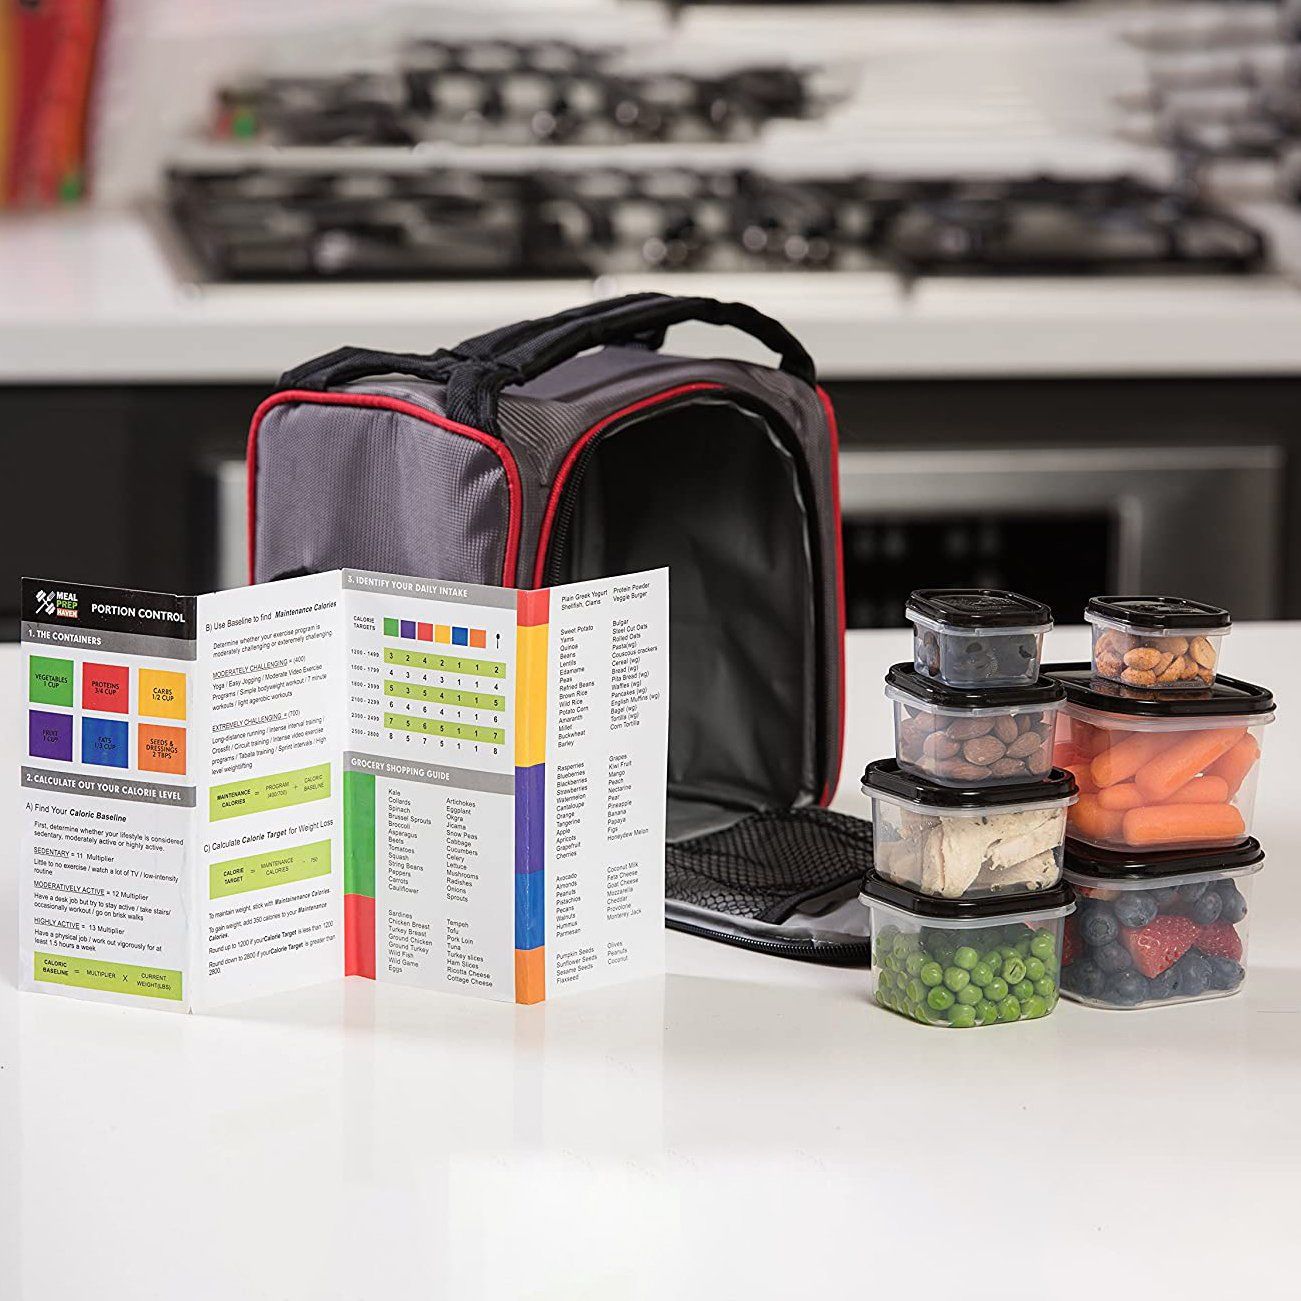 Six Pack of Portion Control Containers